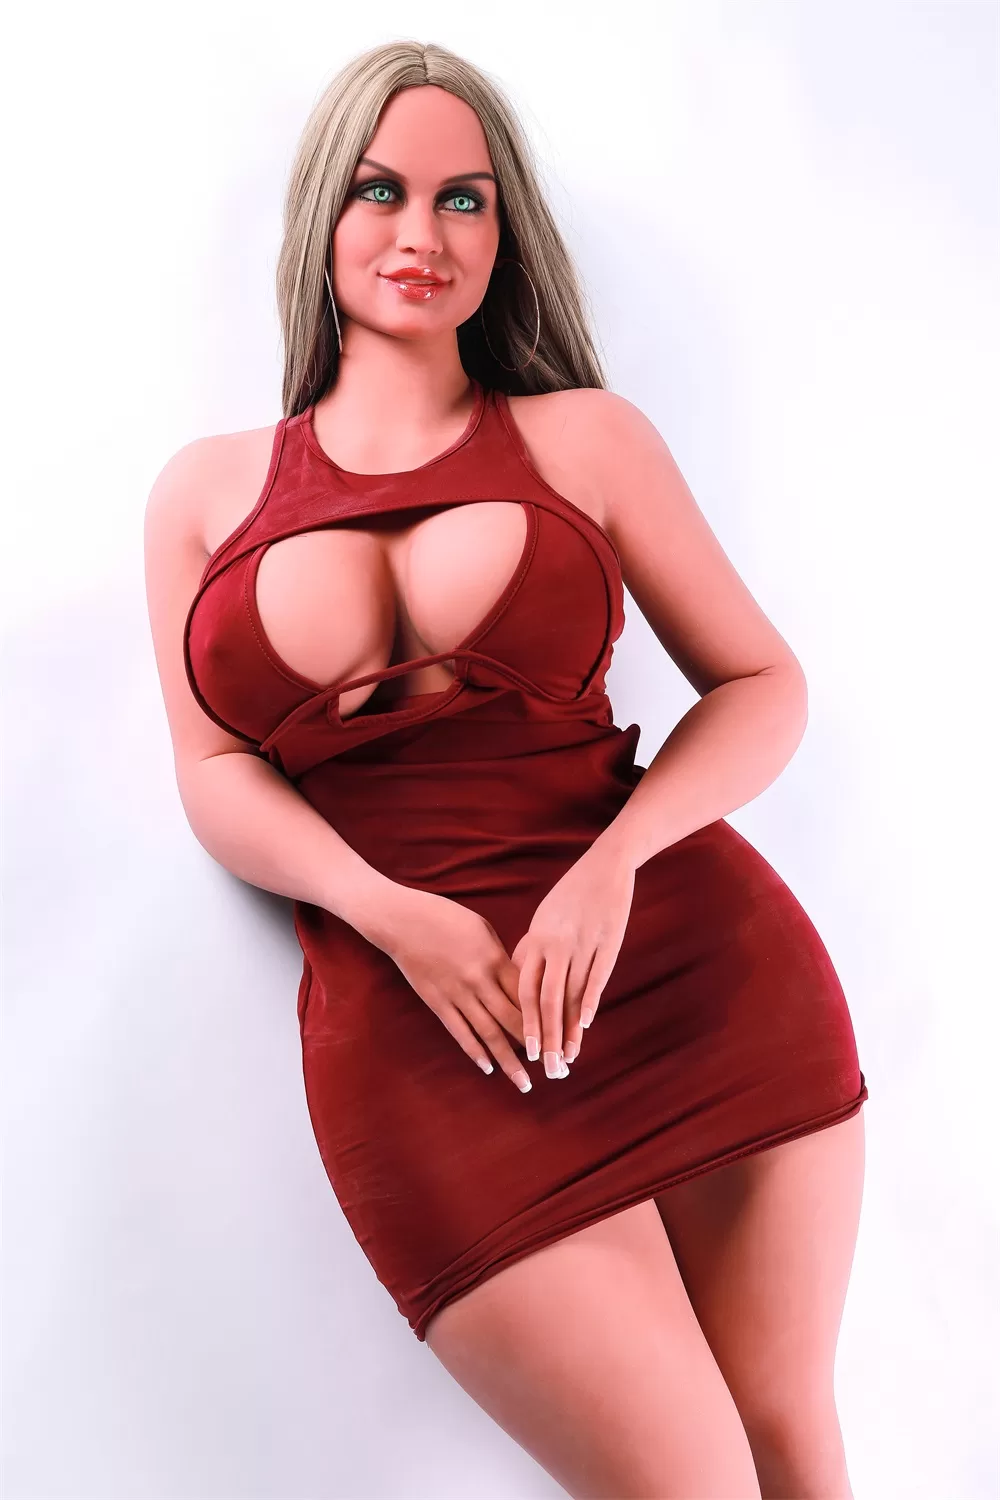 European And American Series Style Silicone Men's Sex Masturbation Device Height 163cm Big Breasts Pink Nipples Vulva Organ White Hair Soft Real Light Brown Skin Sex Little Fat Woman Female Doll 2